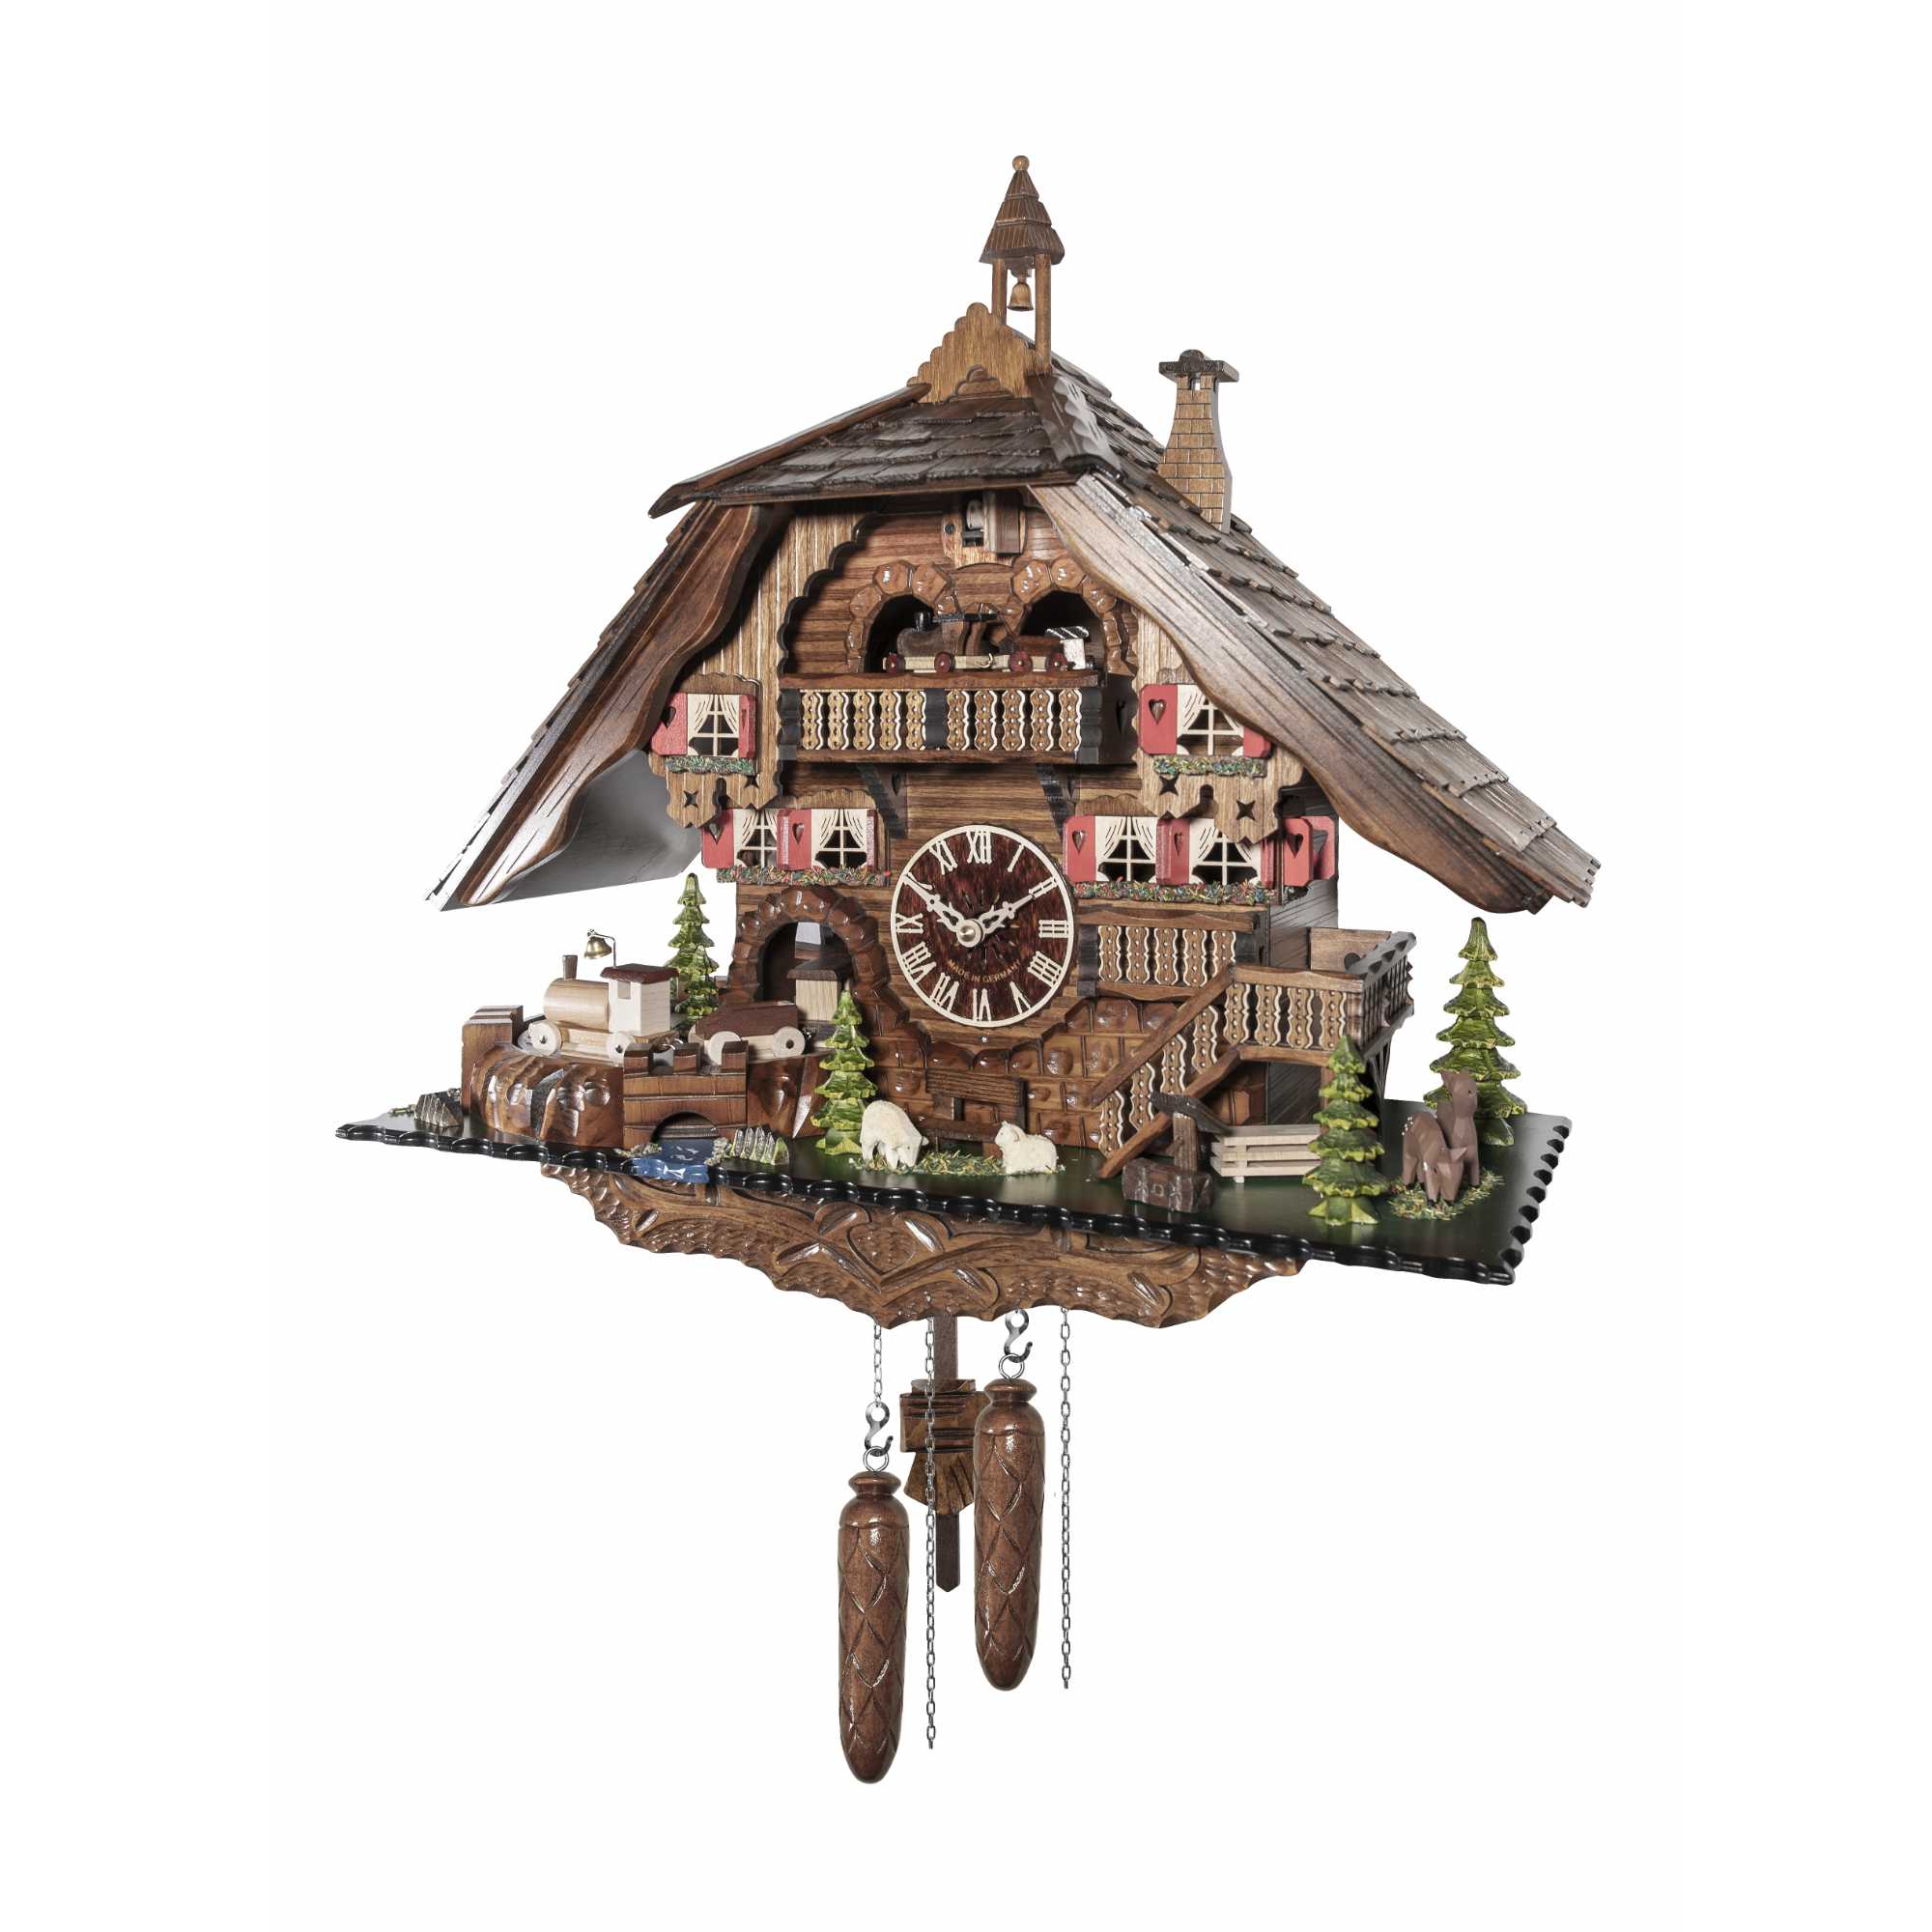 Engstler Quartz Cuckoo Clock Black Forest House with Music and Dancers